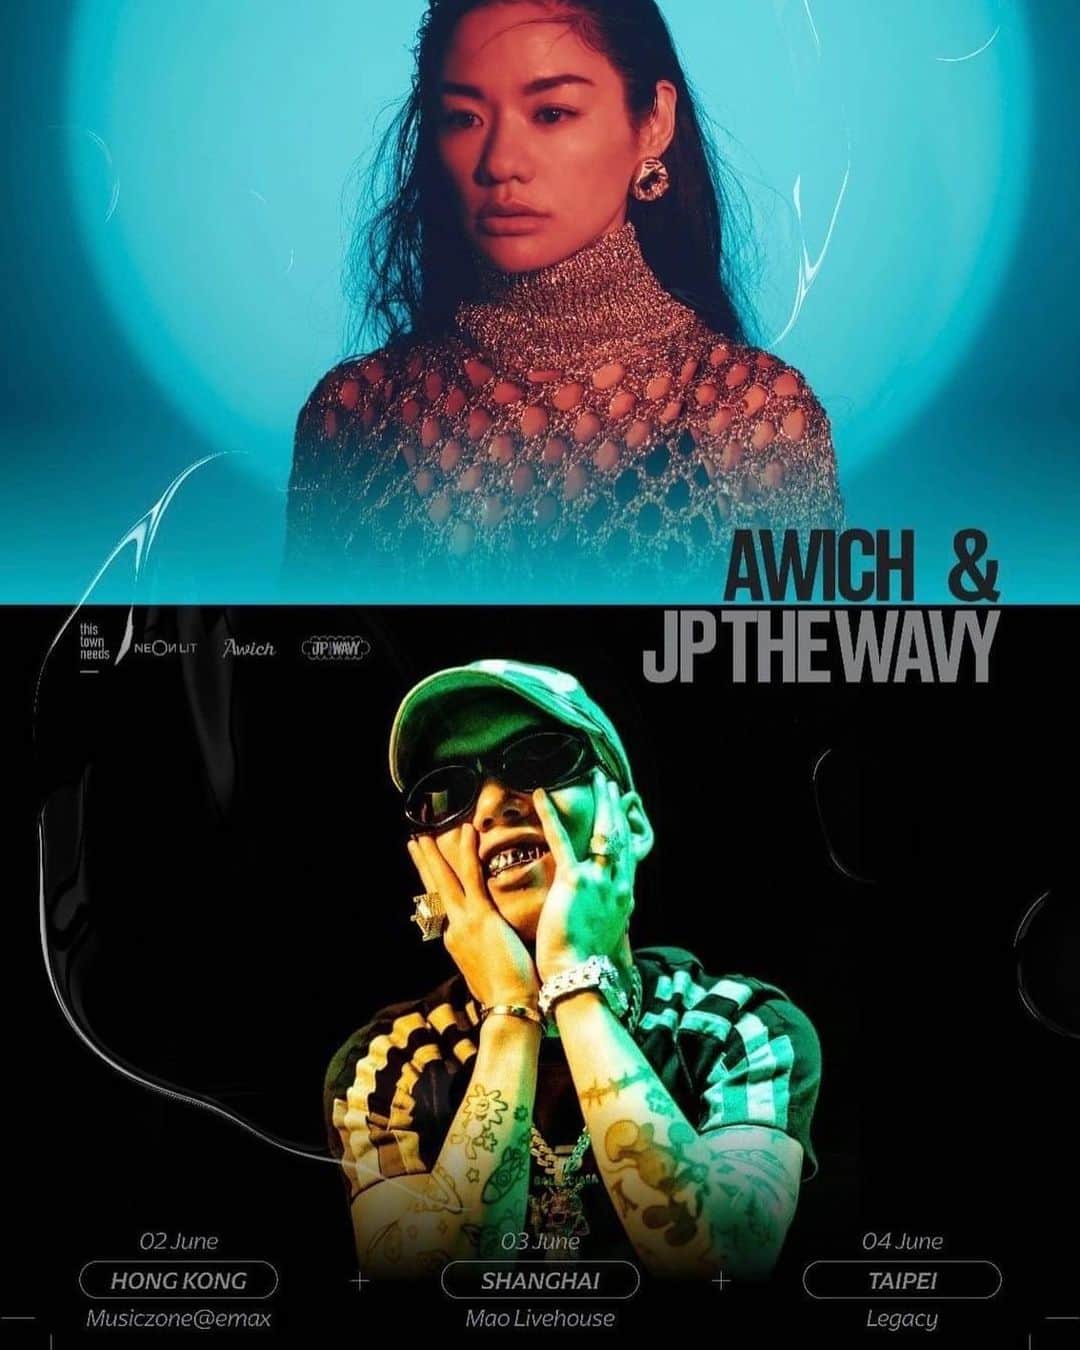 Awichのインスタグラム：「Awich & JP THE WAVY  "Rising Asia Tour"  ツアーでも話したとおり、グラミーに向かってどんどん世界に進むよ🌎✨💫  アジアツアーやります🔥しかも @sorry_wavy と一緒に😍  世界中の友達に知らせてね🌎📣😍✨ Tell them I’m coming😈😍🙏🔥🔥🔥🔥  Awich & JP THE WAVY "Rising Asia Tour"   2023/06/02 (FRI) 香港 MUSICZONE@EMAX Special guest : Youngqueenz  2023/06/03 (SAT) 上海 MAOLIVEHOUSE Special guests：Psy.P | Straight Fire Gang  2023/06/04 (SUN) 台北 LEGACY TAIPEI Special guests：Asiaboy & Lizi | Multiverse  #Awich #JPTHEWAVY #RisingAsiaTour  Can’t wait to see you all there🔥🔥🙏❤️  Tickets info on my highlight  チケットはハイライトから❤️」